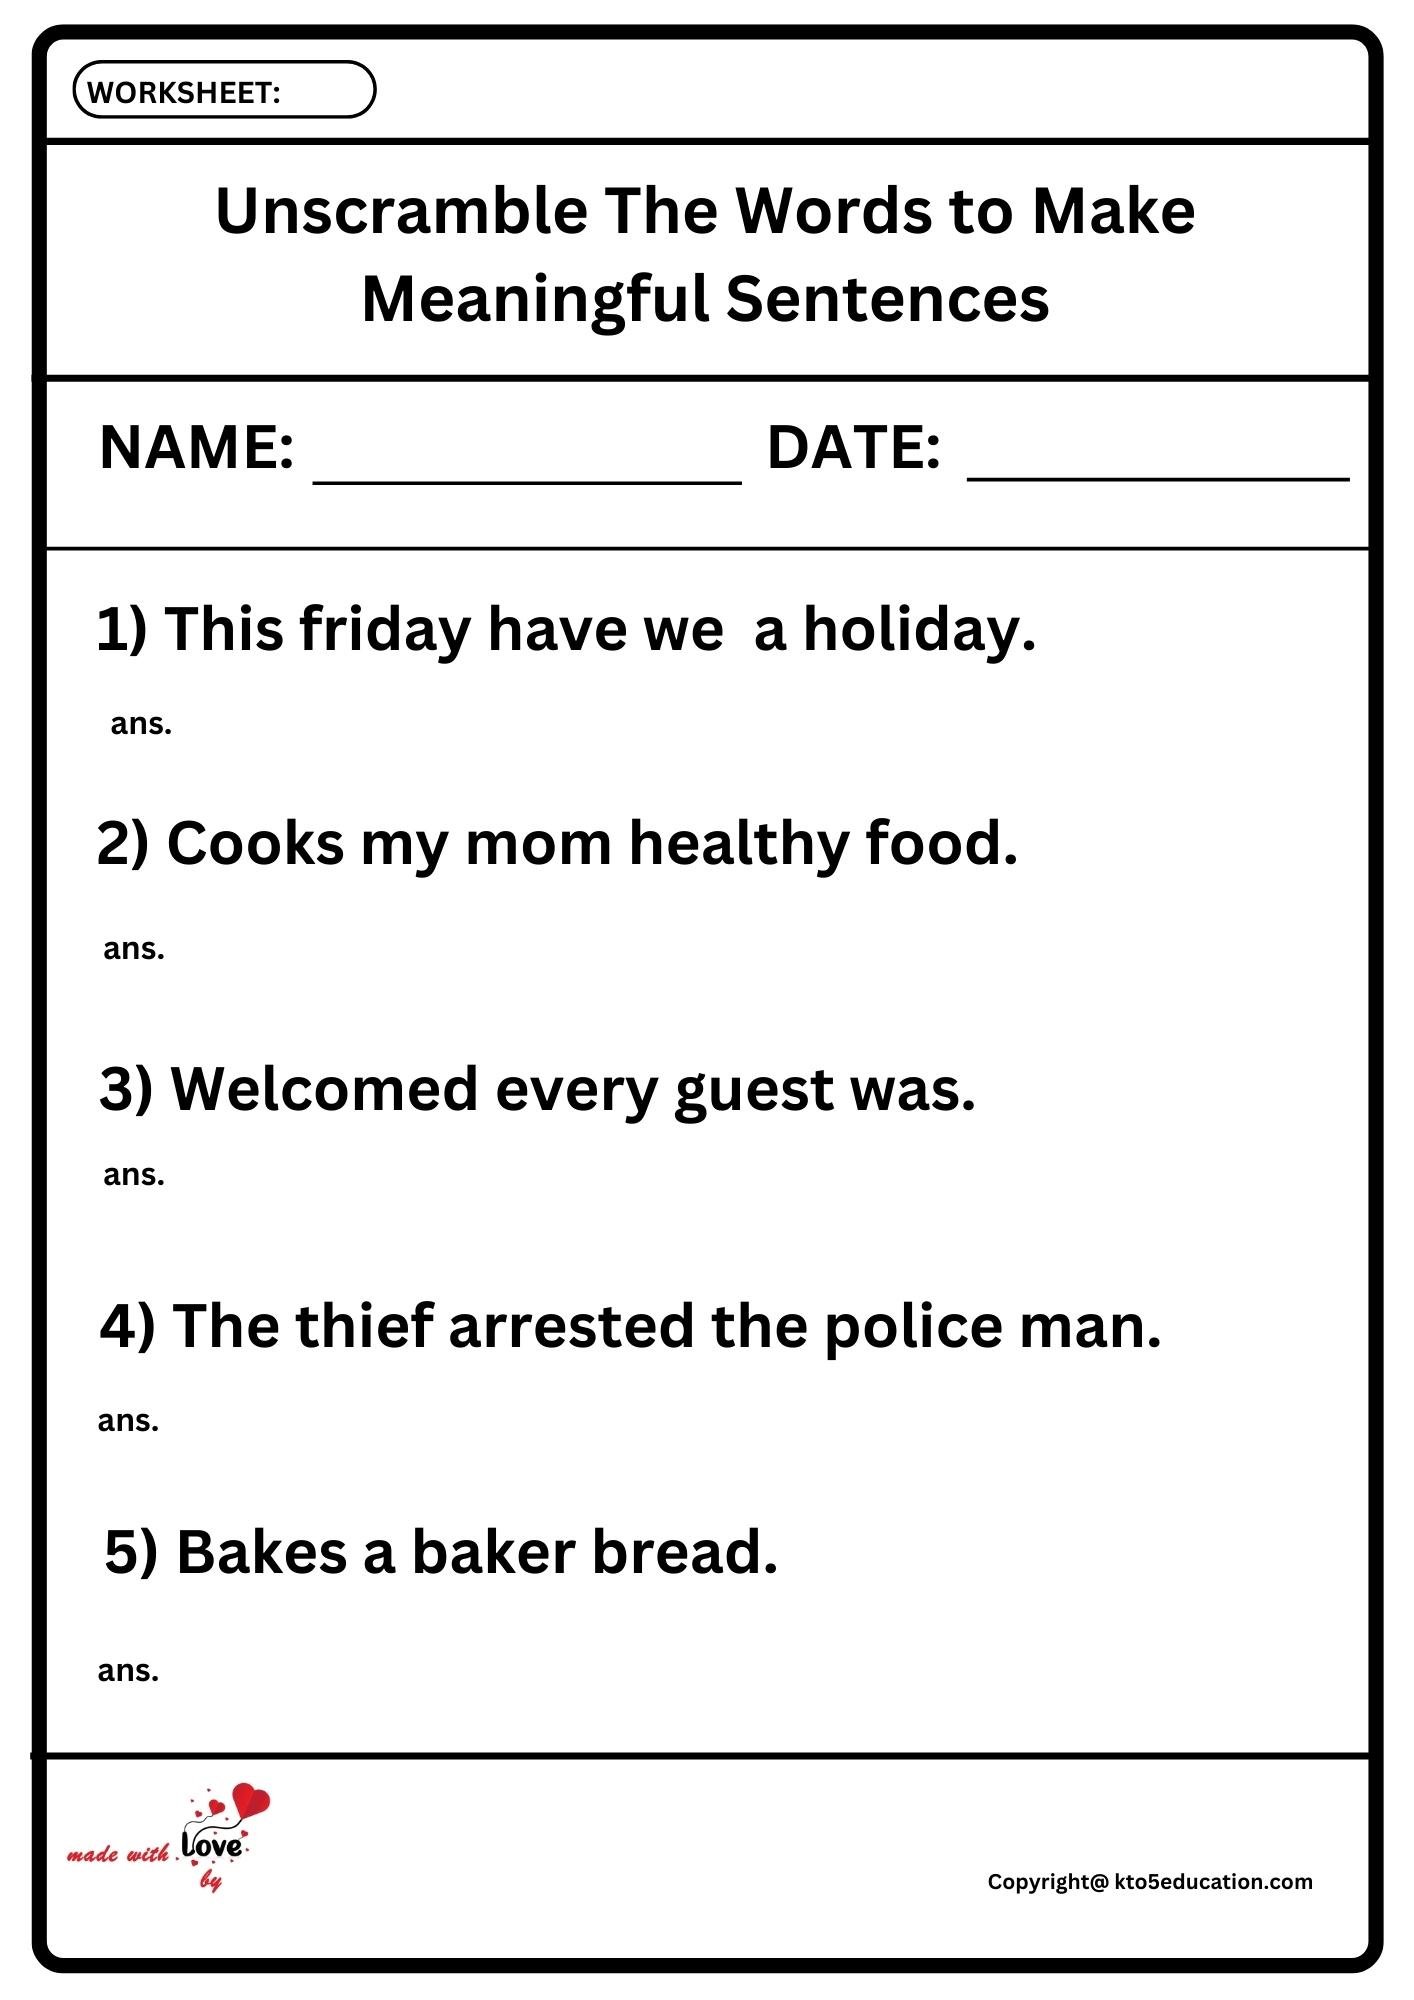 Unscramble The Word To Make Meaningful Sentences Worksheet